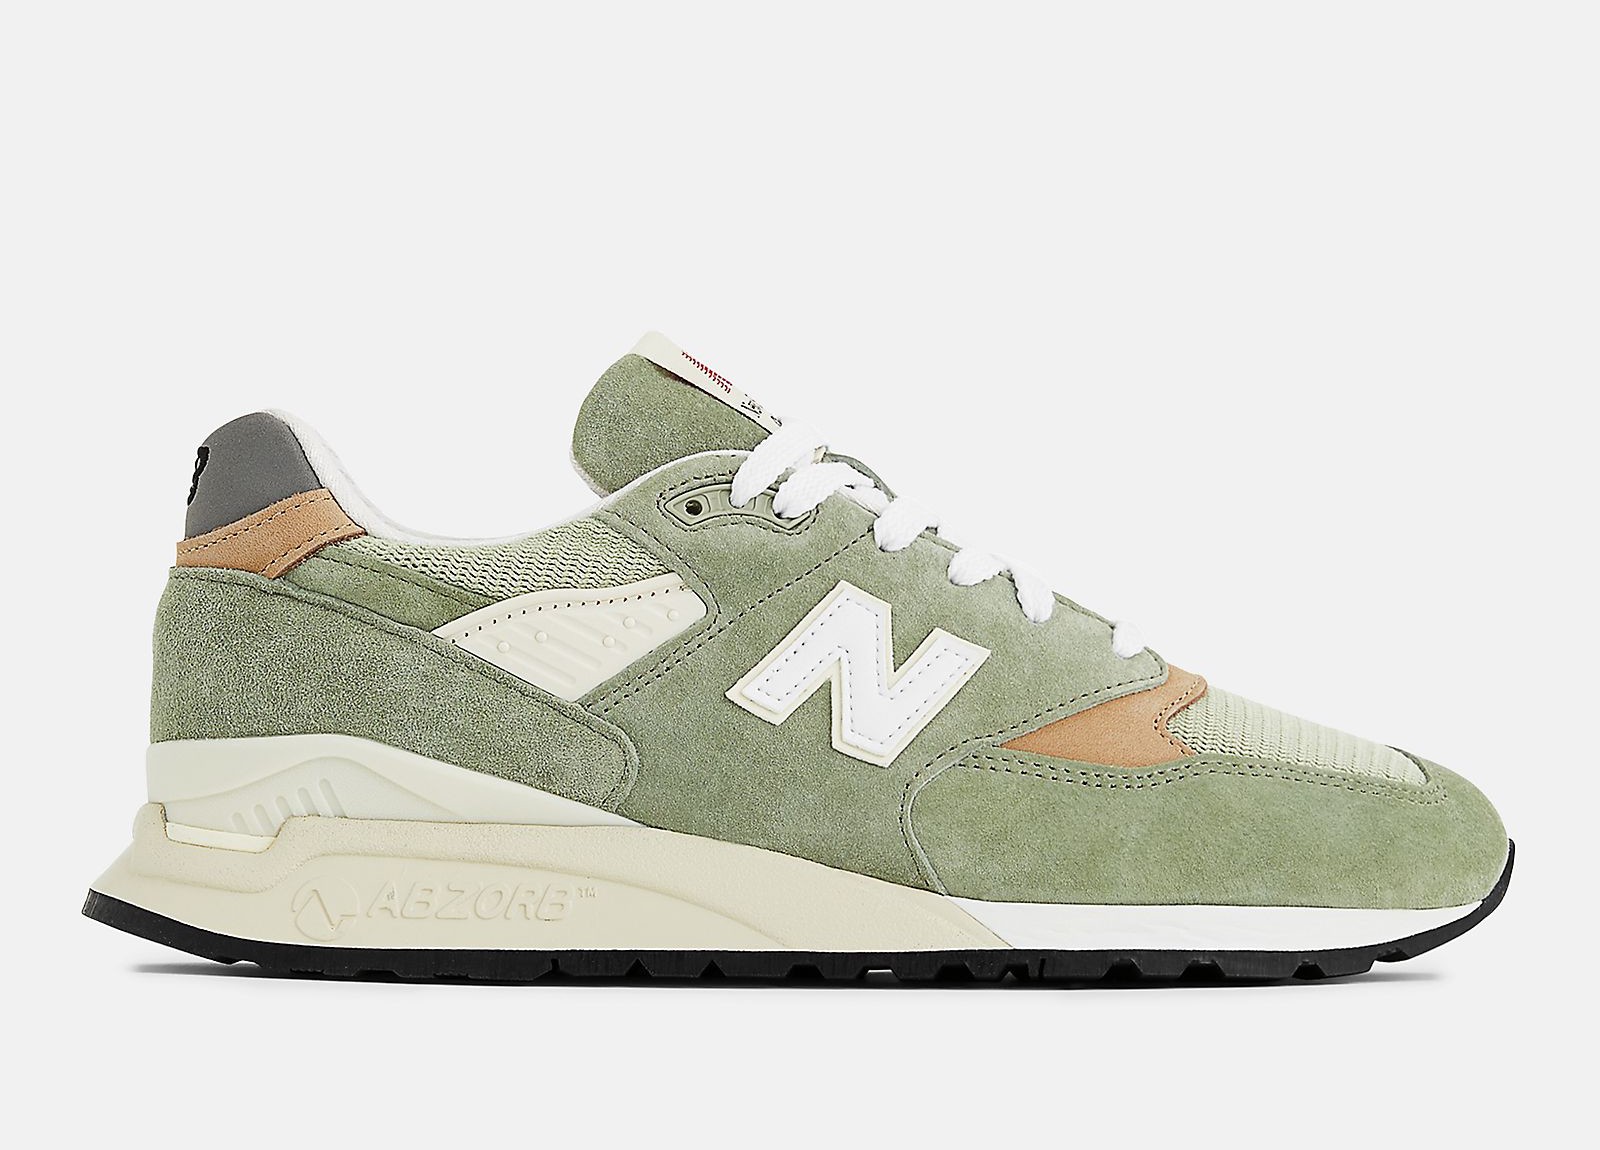 New Balance U998GT
Made in USA
Olive / Incense